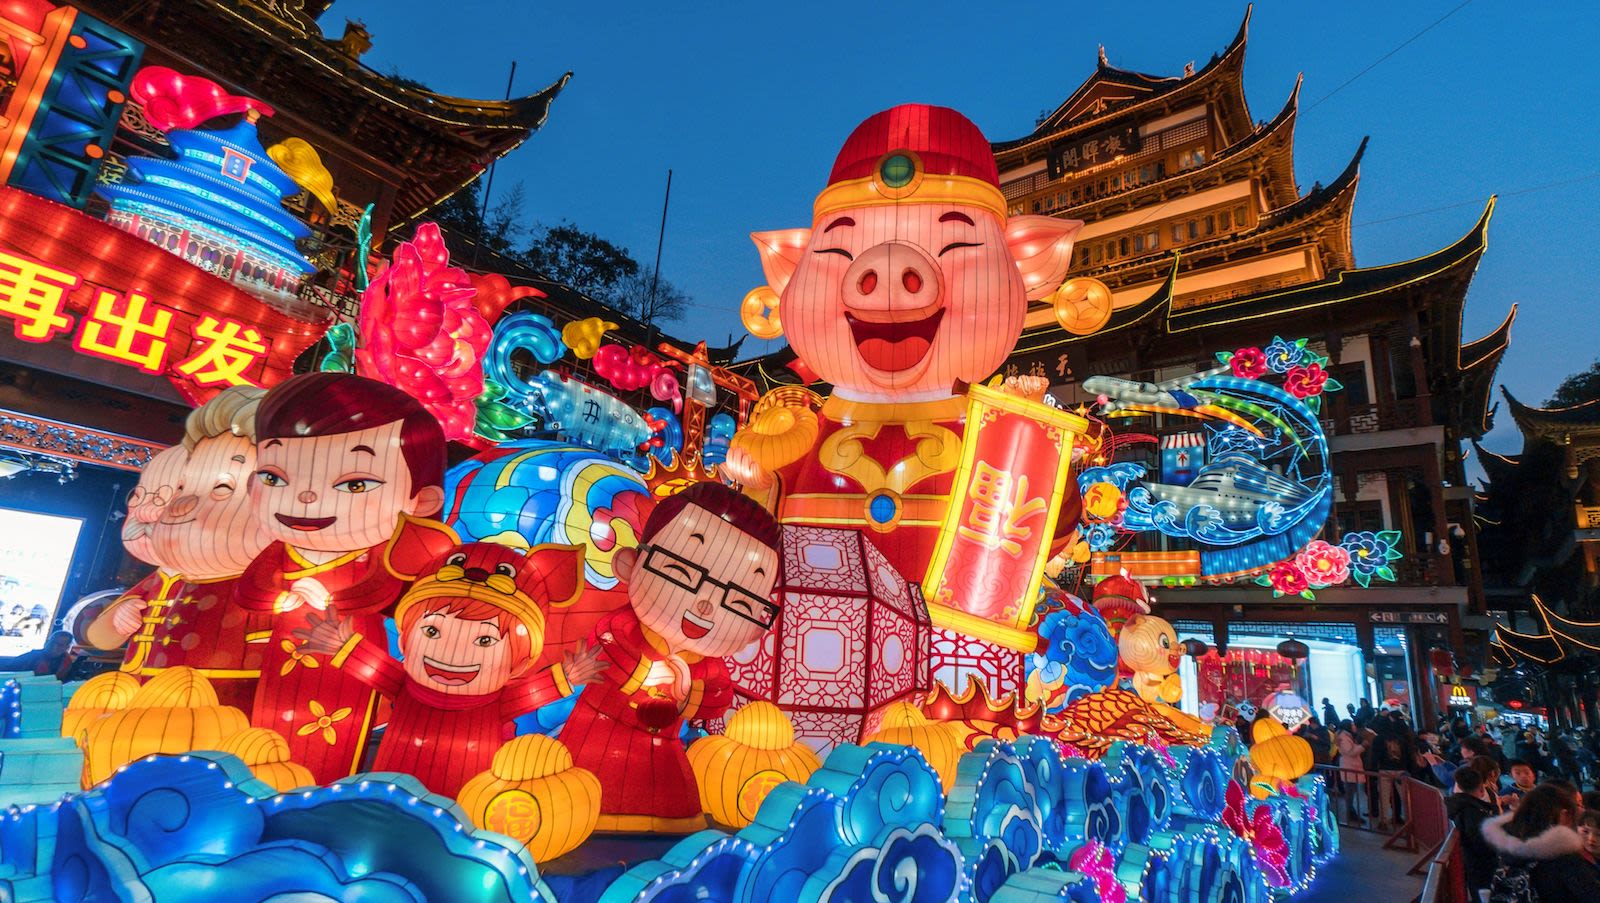 Lunar New Year 2019: Welcoming The Year Of The Pig | Cnn